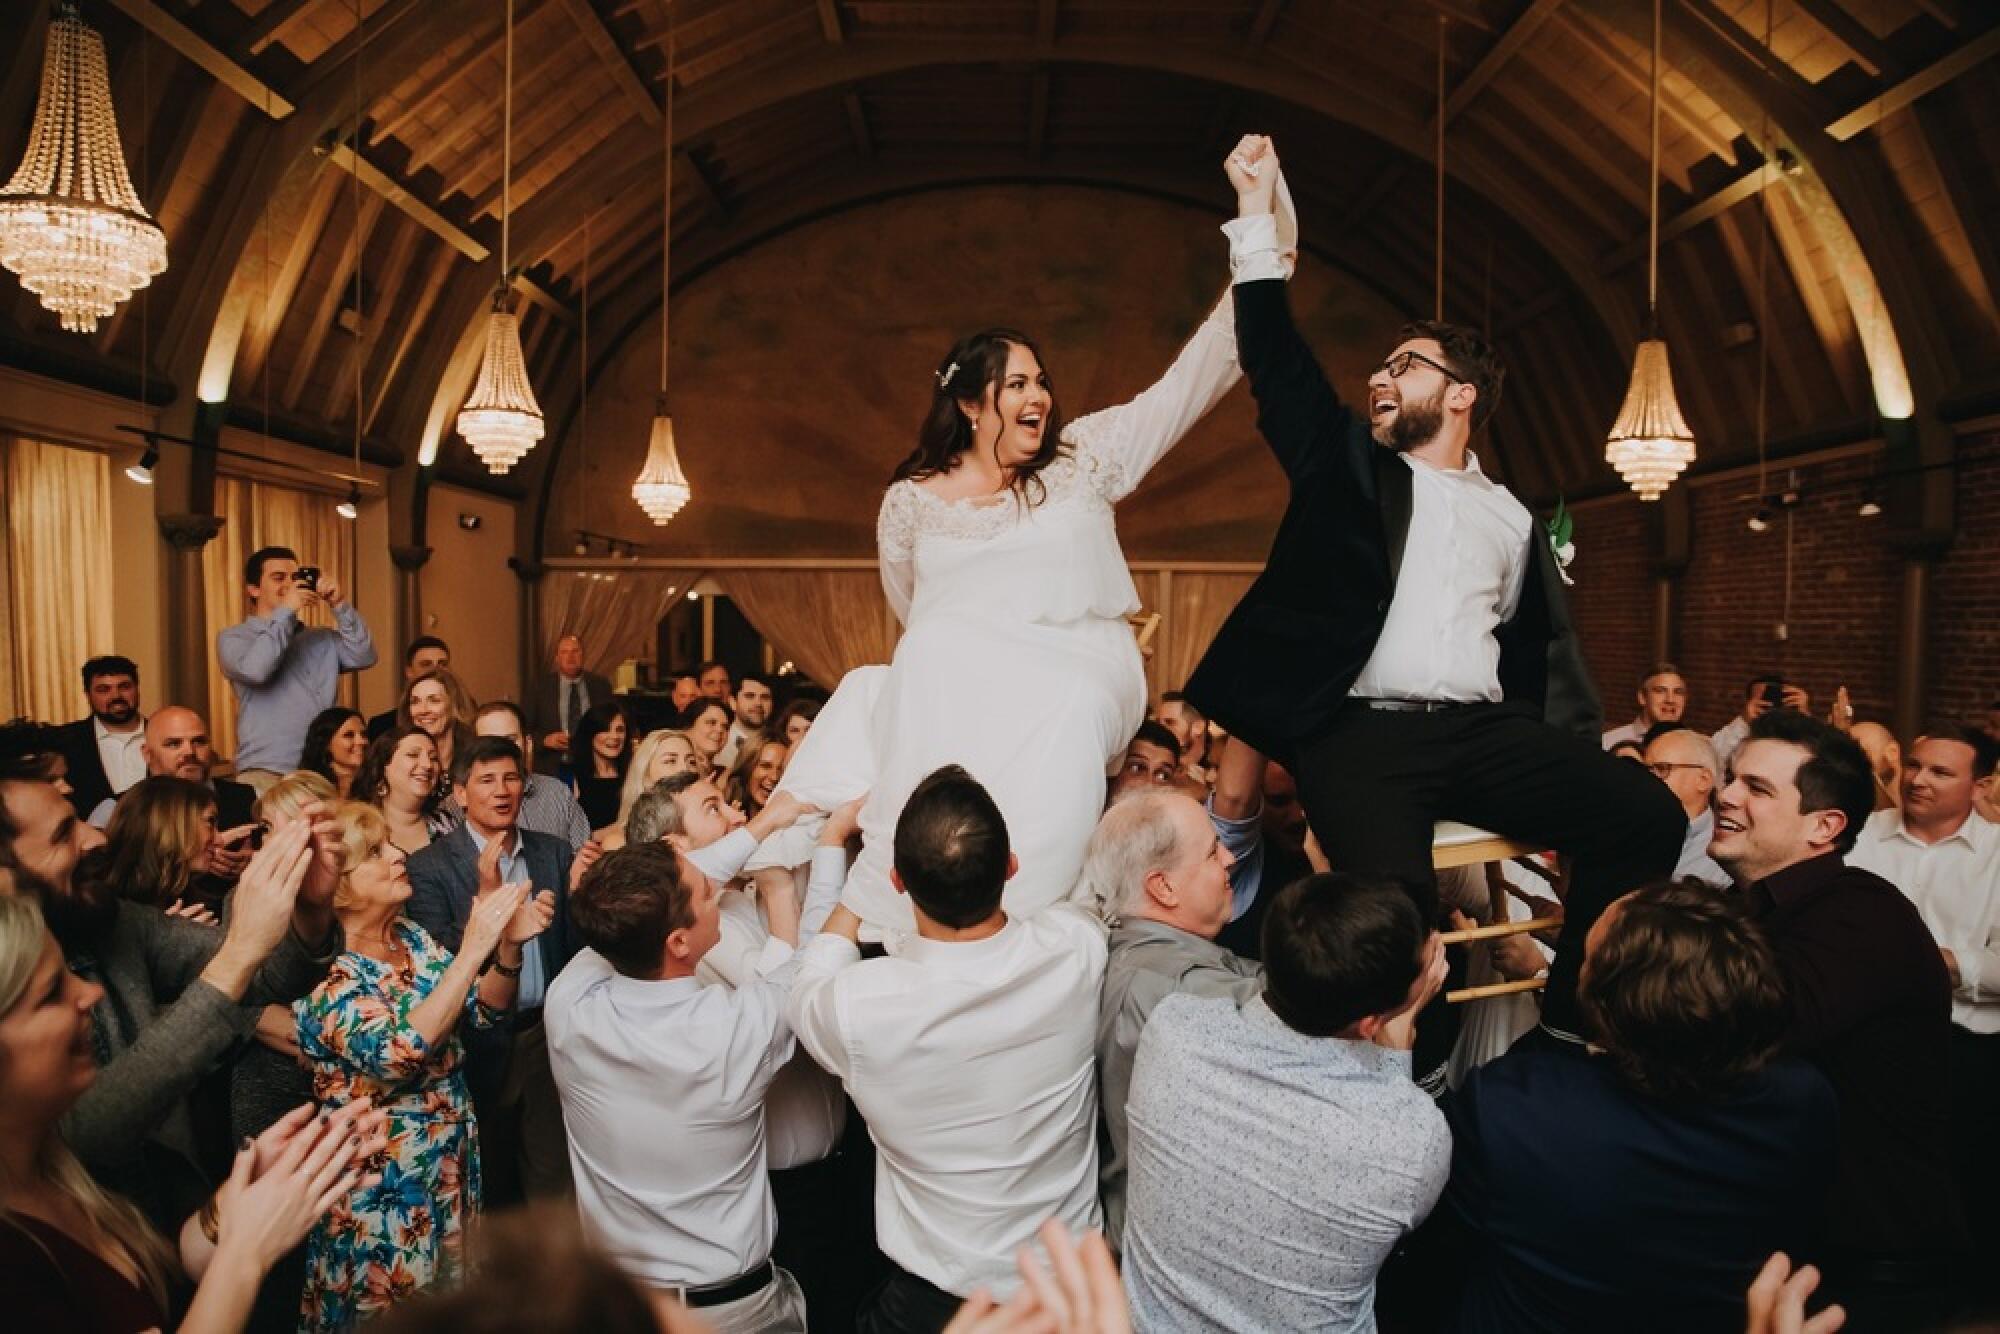 A crowd lifts a bride and groom seated on chairs at their wedding.